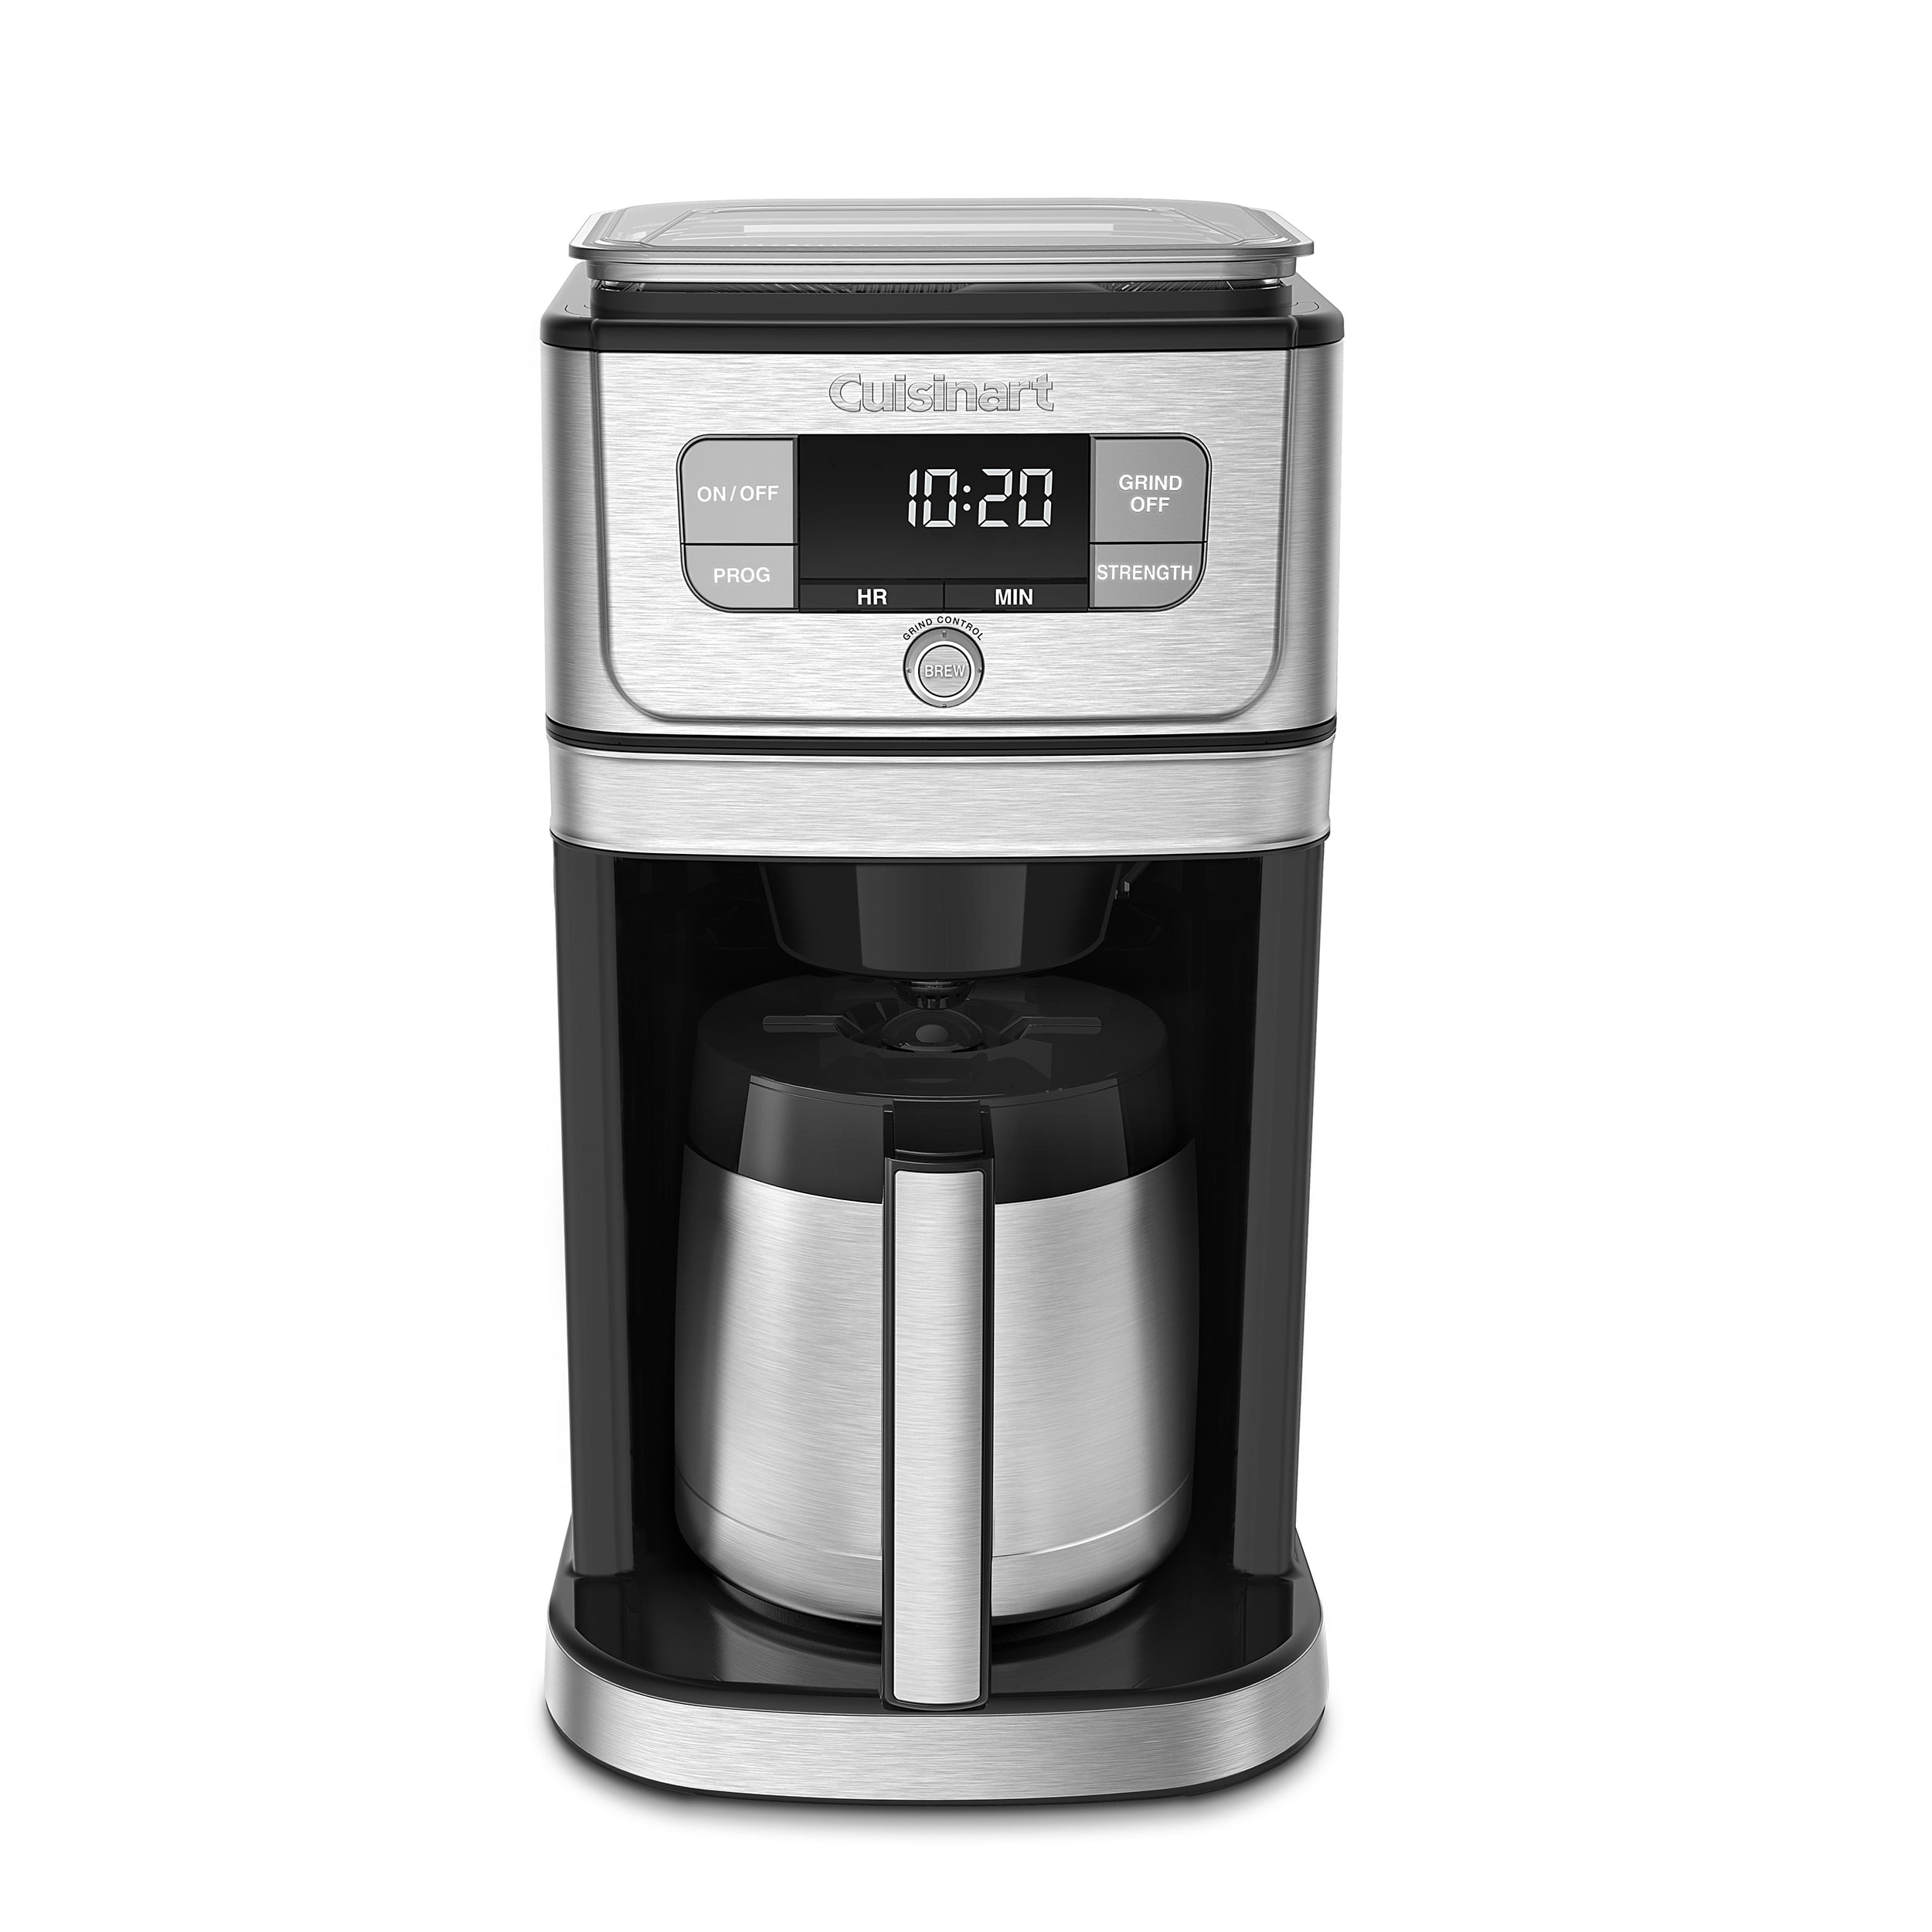  KIDISLE Electric Burr Coffee Grinder 3.0, Automatic Flat Burr  Coffee for French Press, Drip Coffee and Espresso, Adjustable Burr Mill  with 16 settings, 14 Cup, Black : Grocery & Gourmet Food